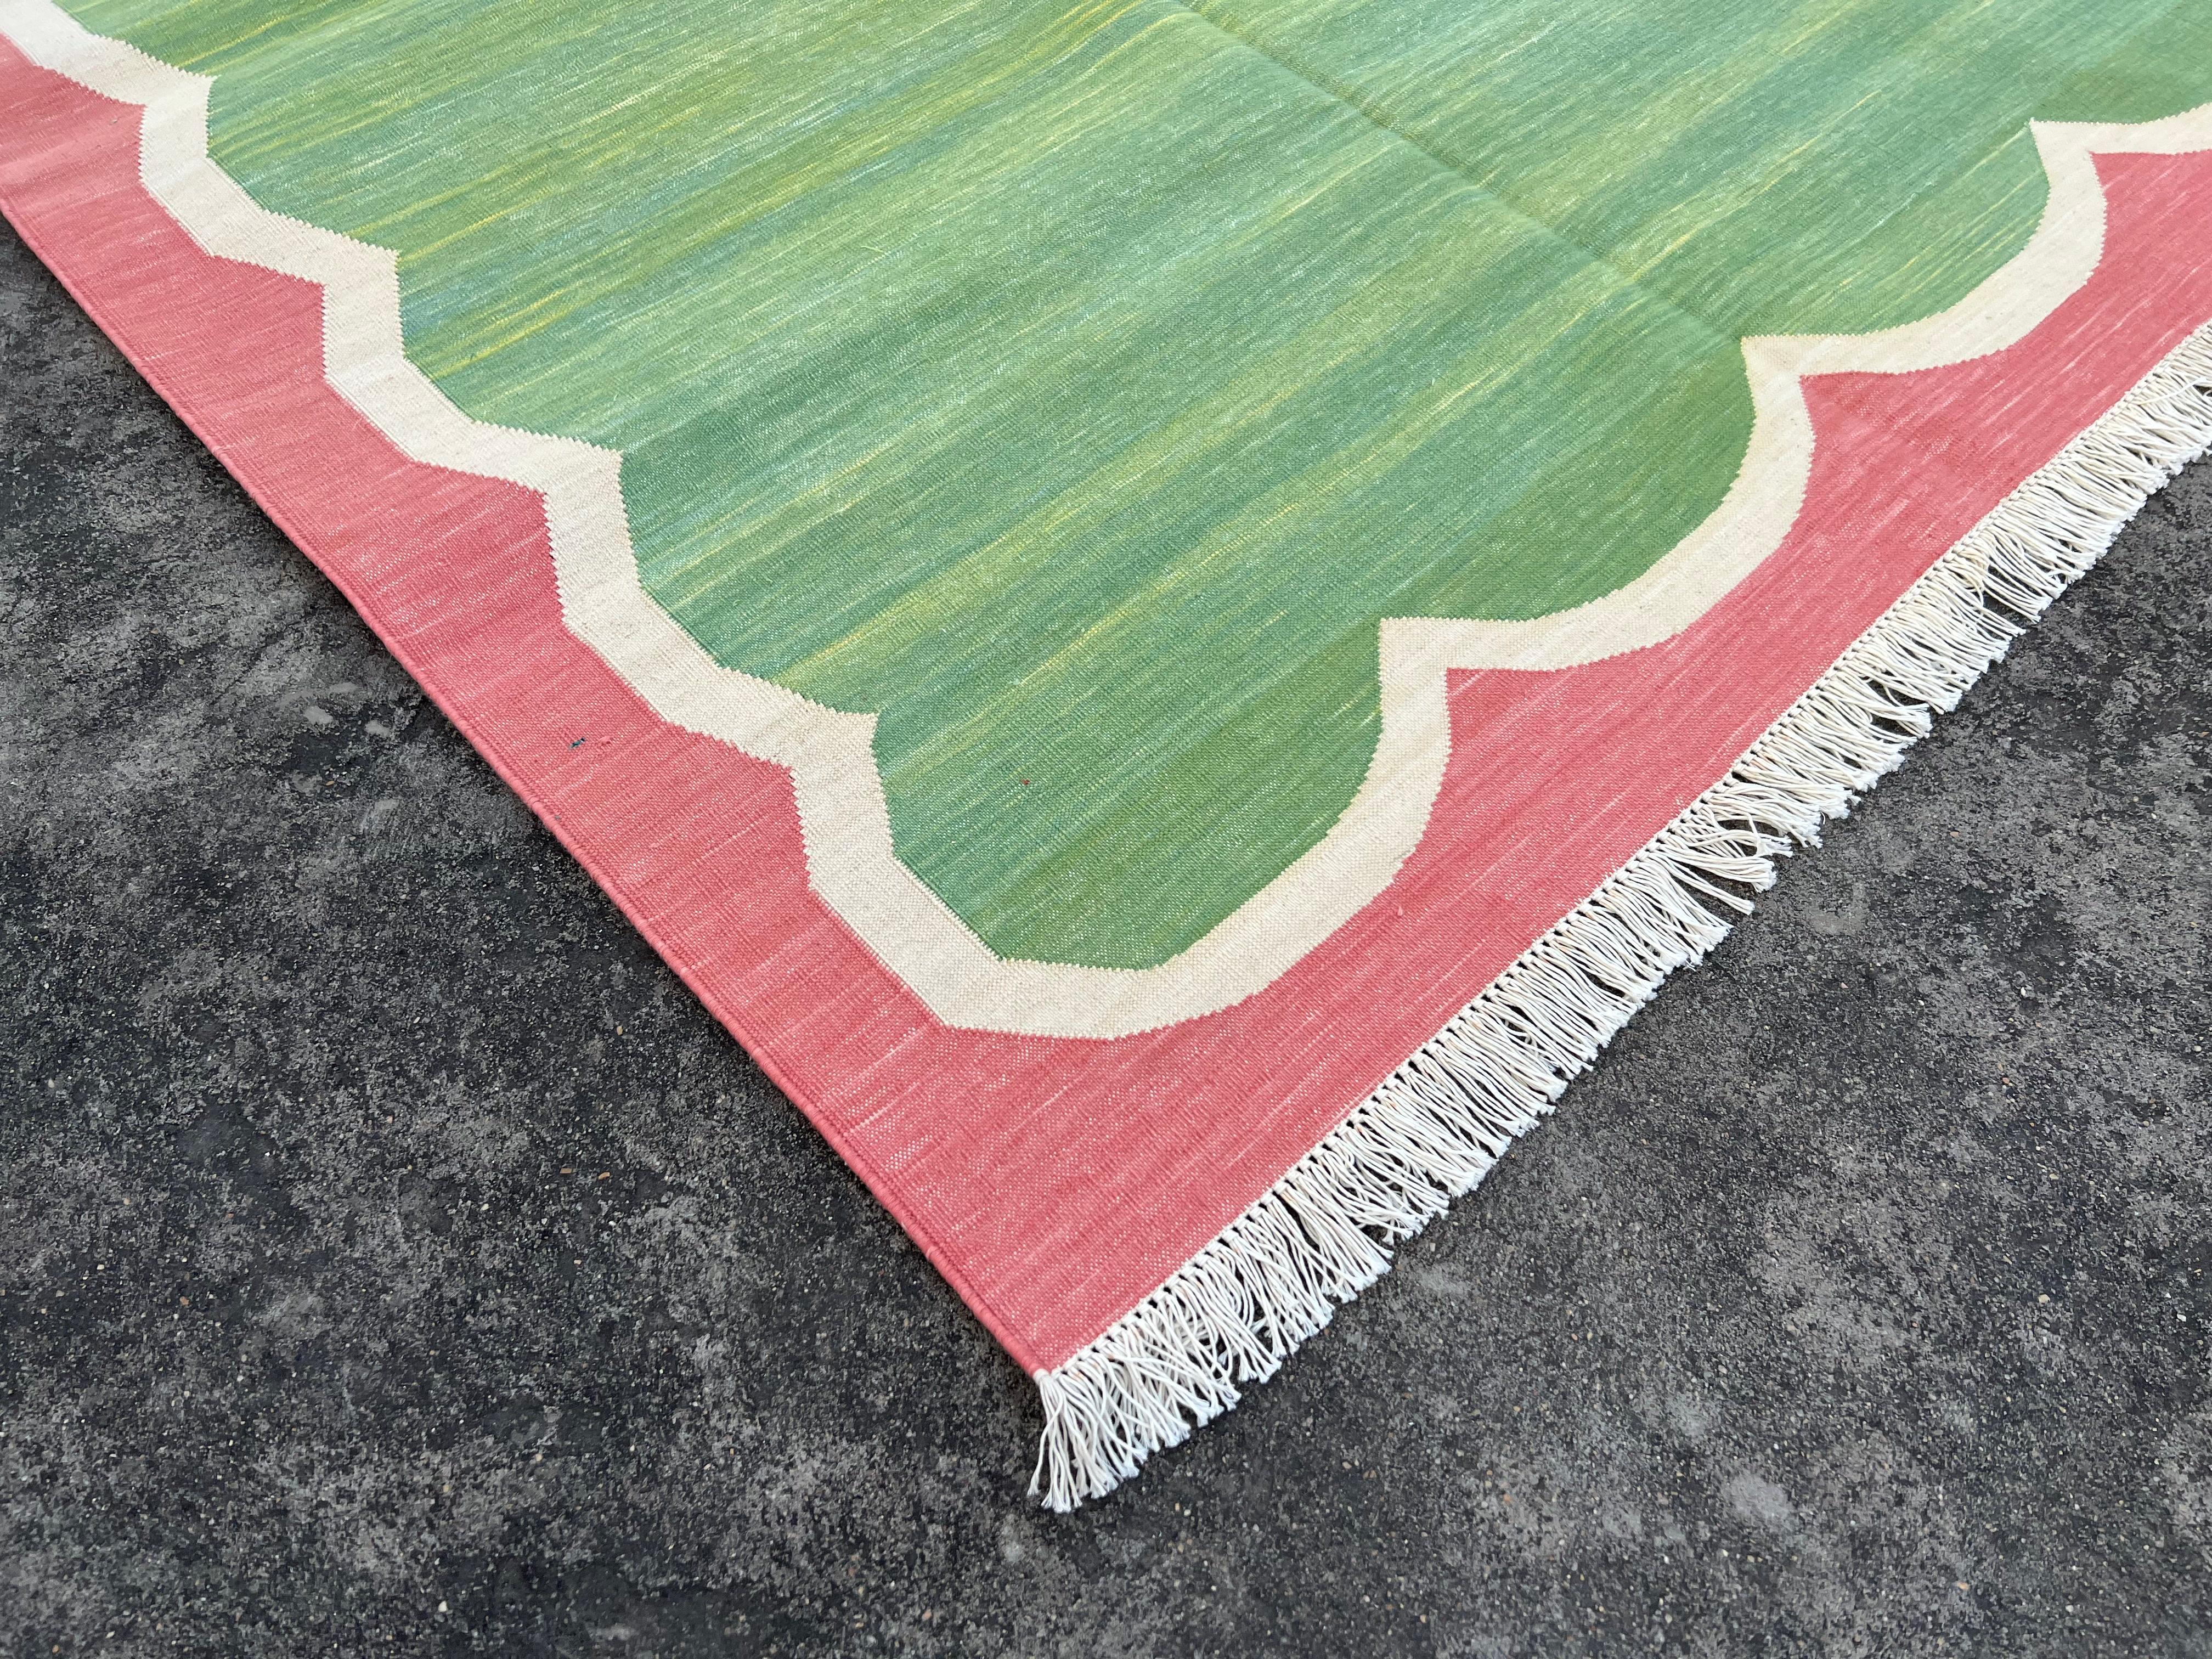 Cotton Vegetable Dyed Green and Coral Scalloped Striped Indian Dhurrie Rug-4'x6' 

These special flat-weave dhurries are hand-woven with 15 ply 100% cotton yarn. Due to the special manufacturing techniques used to create our rugs, the size and color